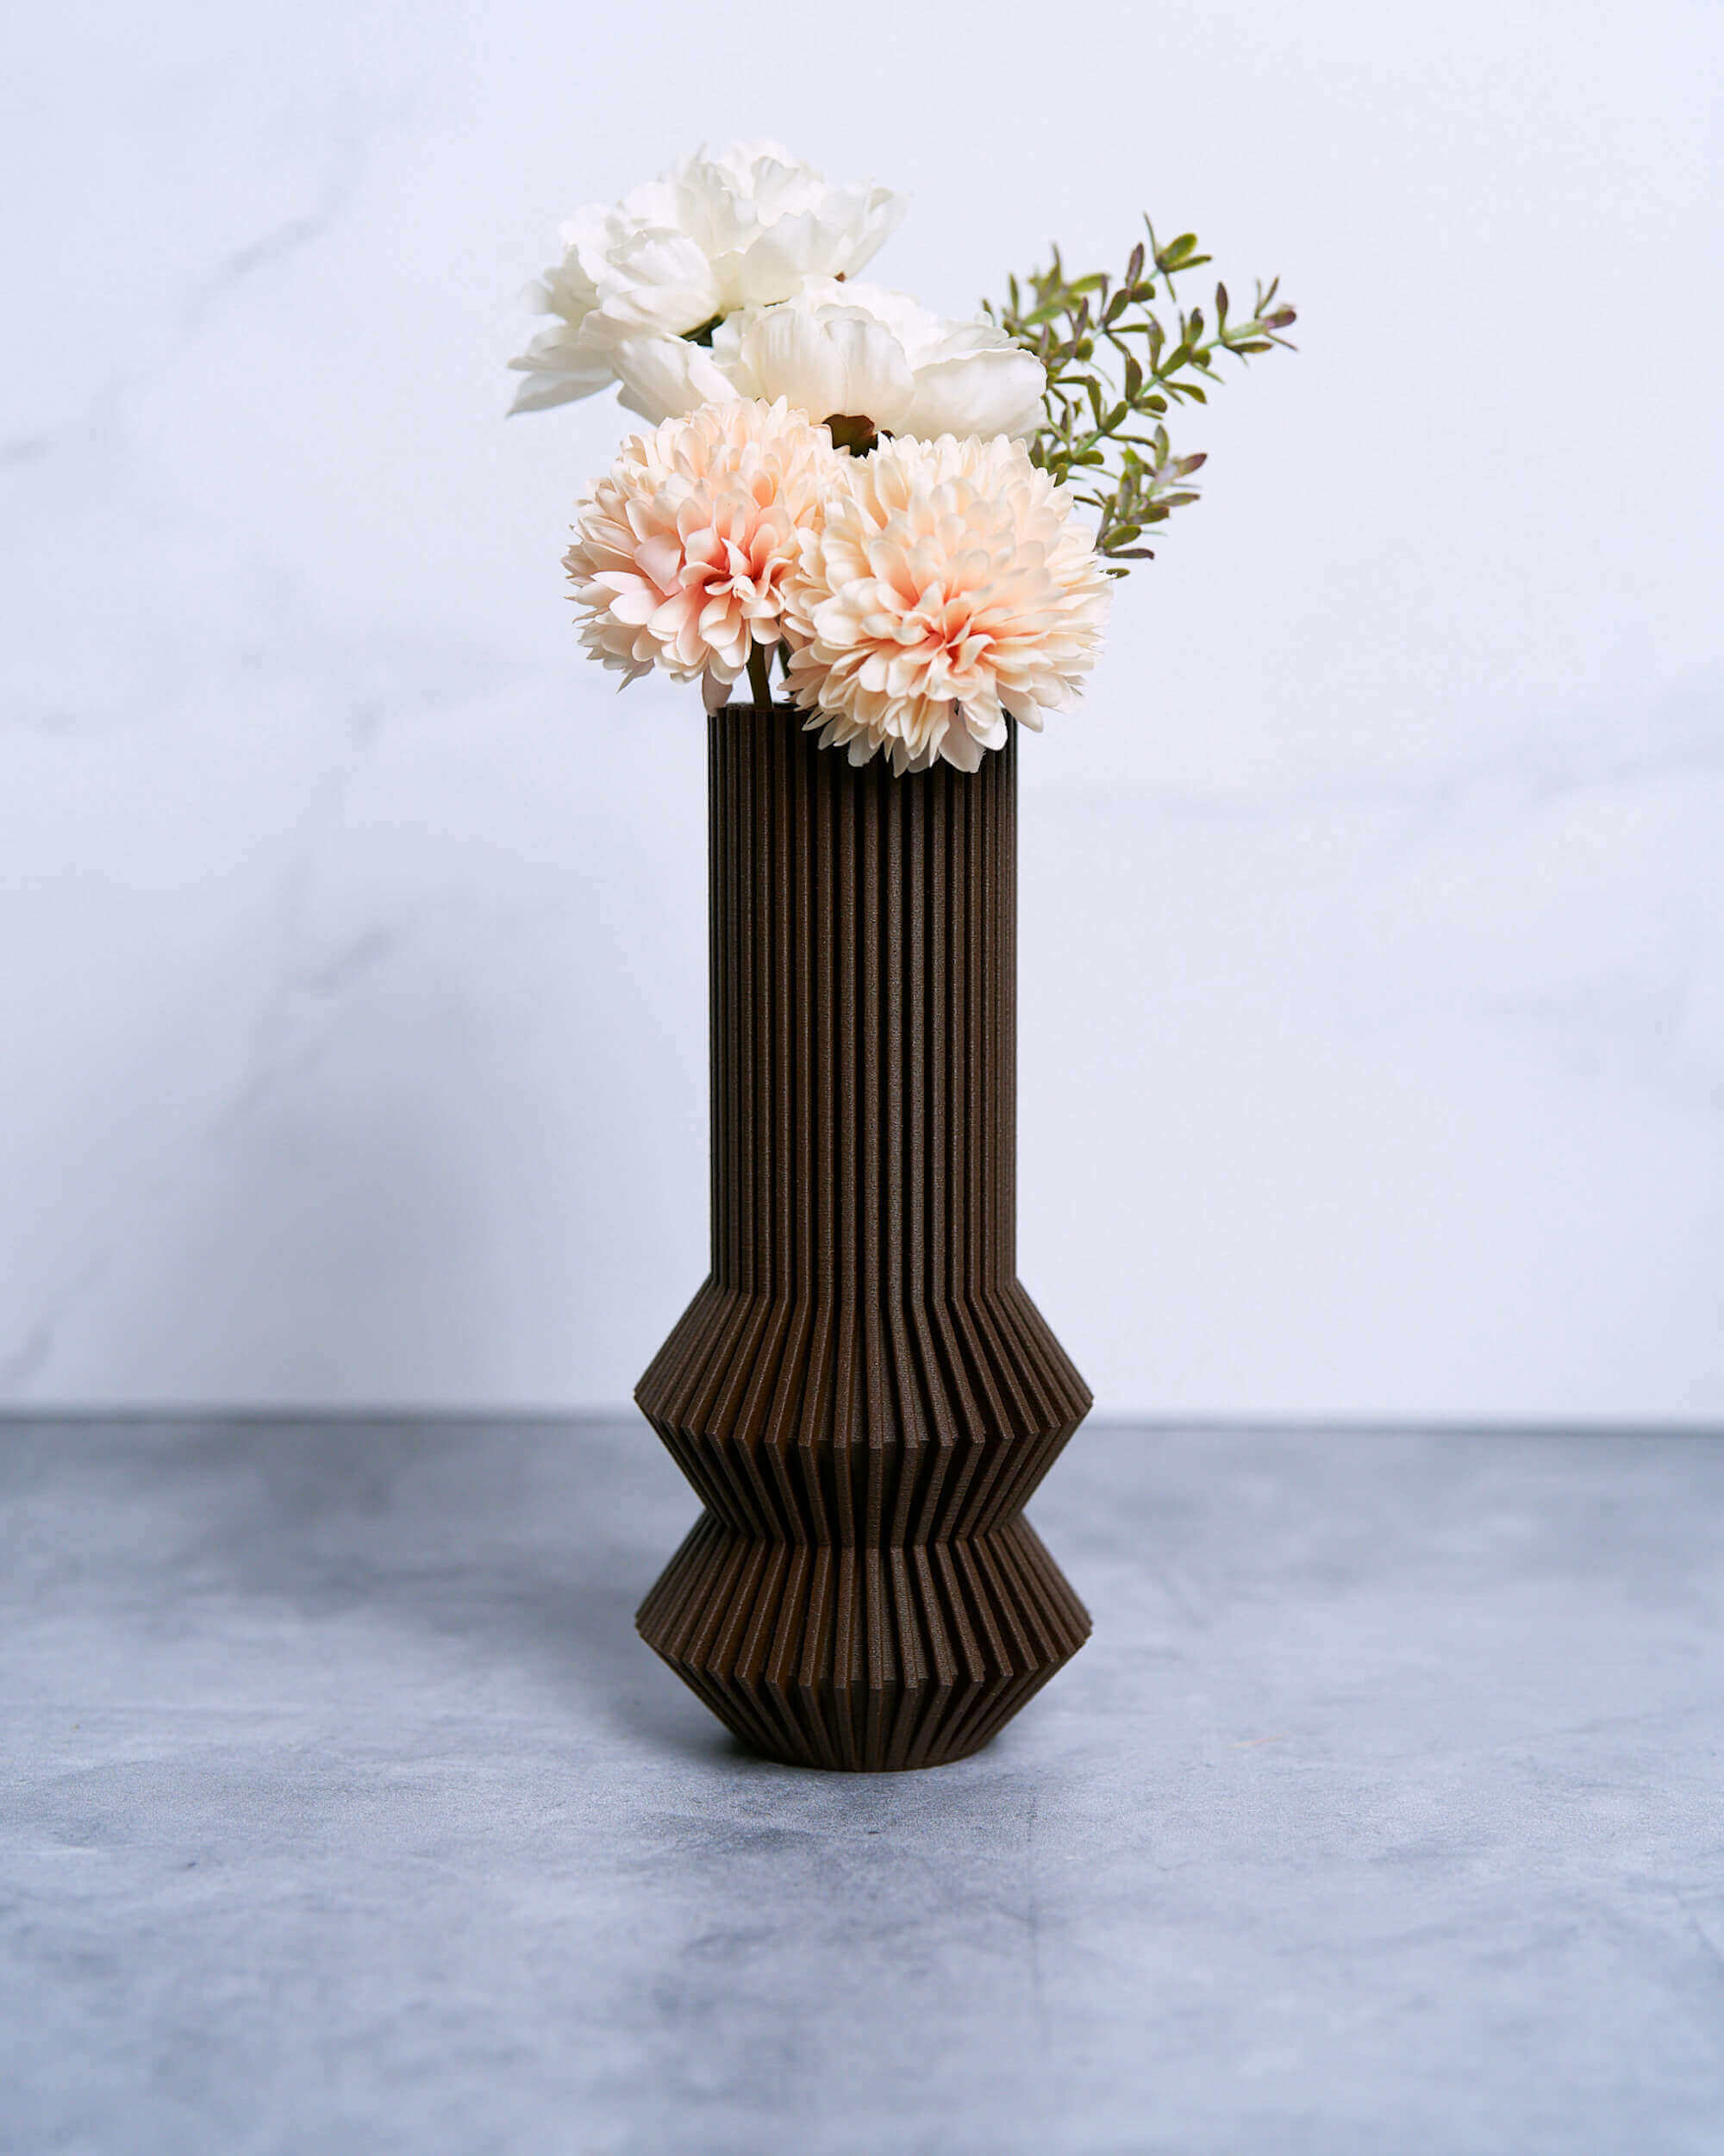 A mid century modern vase by Woodland Pulse. This is a brown vase with pink flowers inside from the modern vases collection.